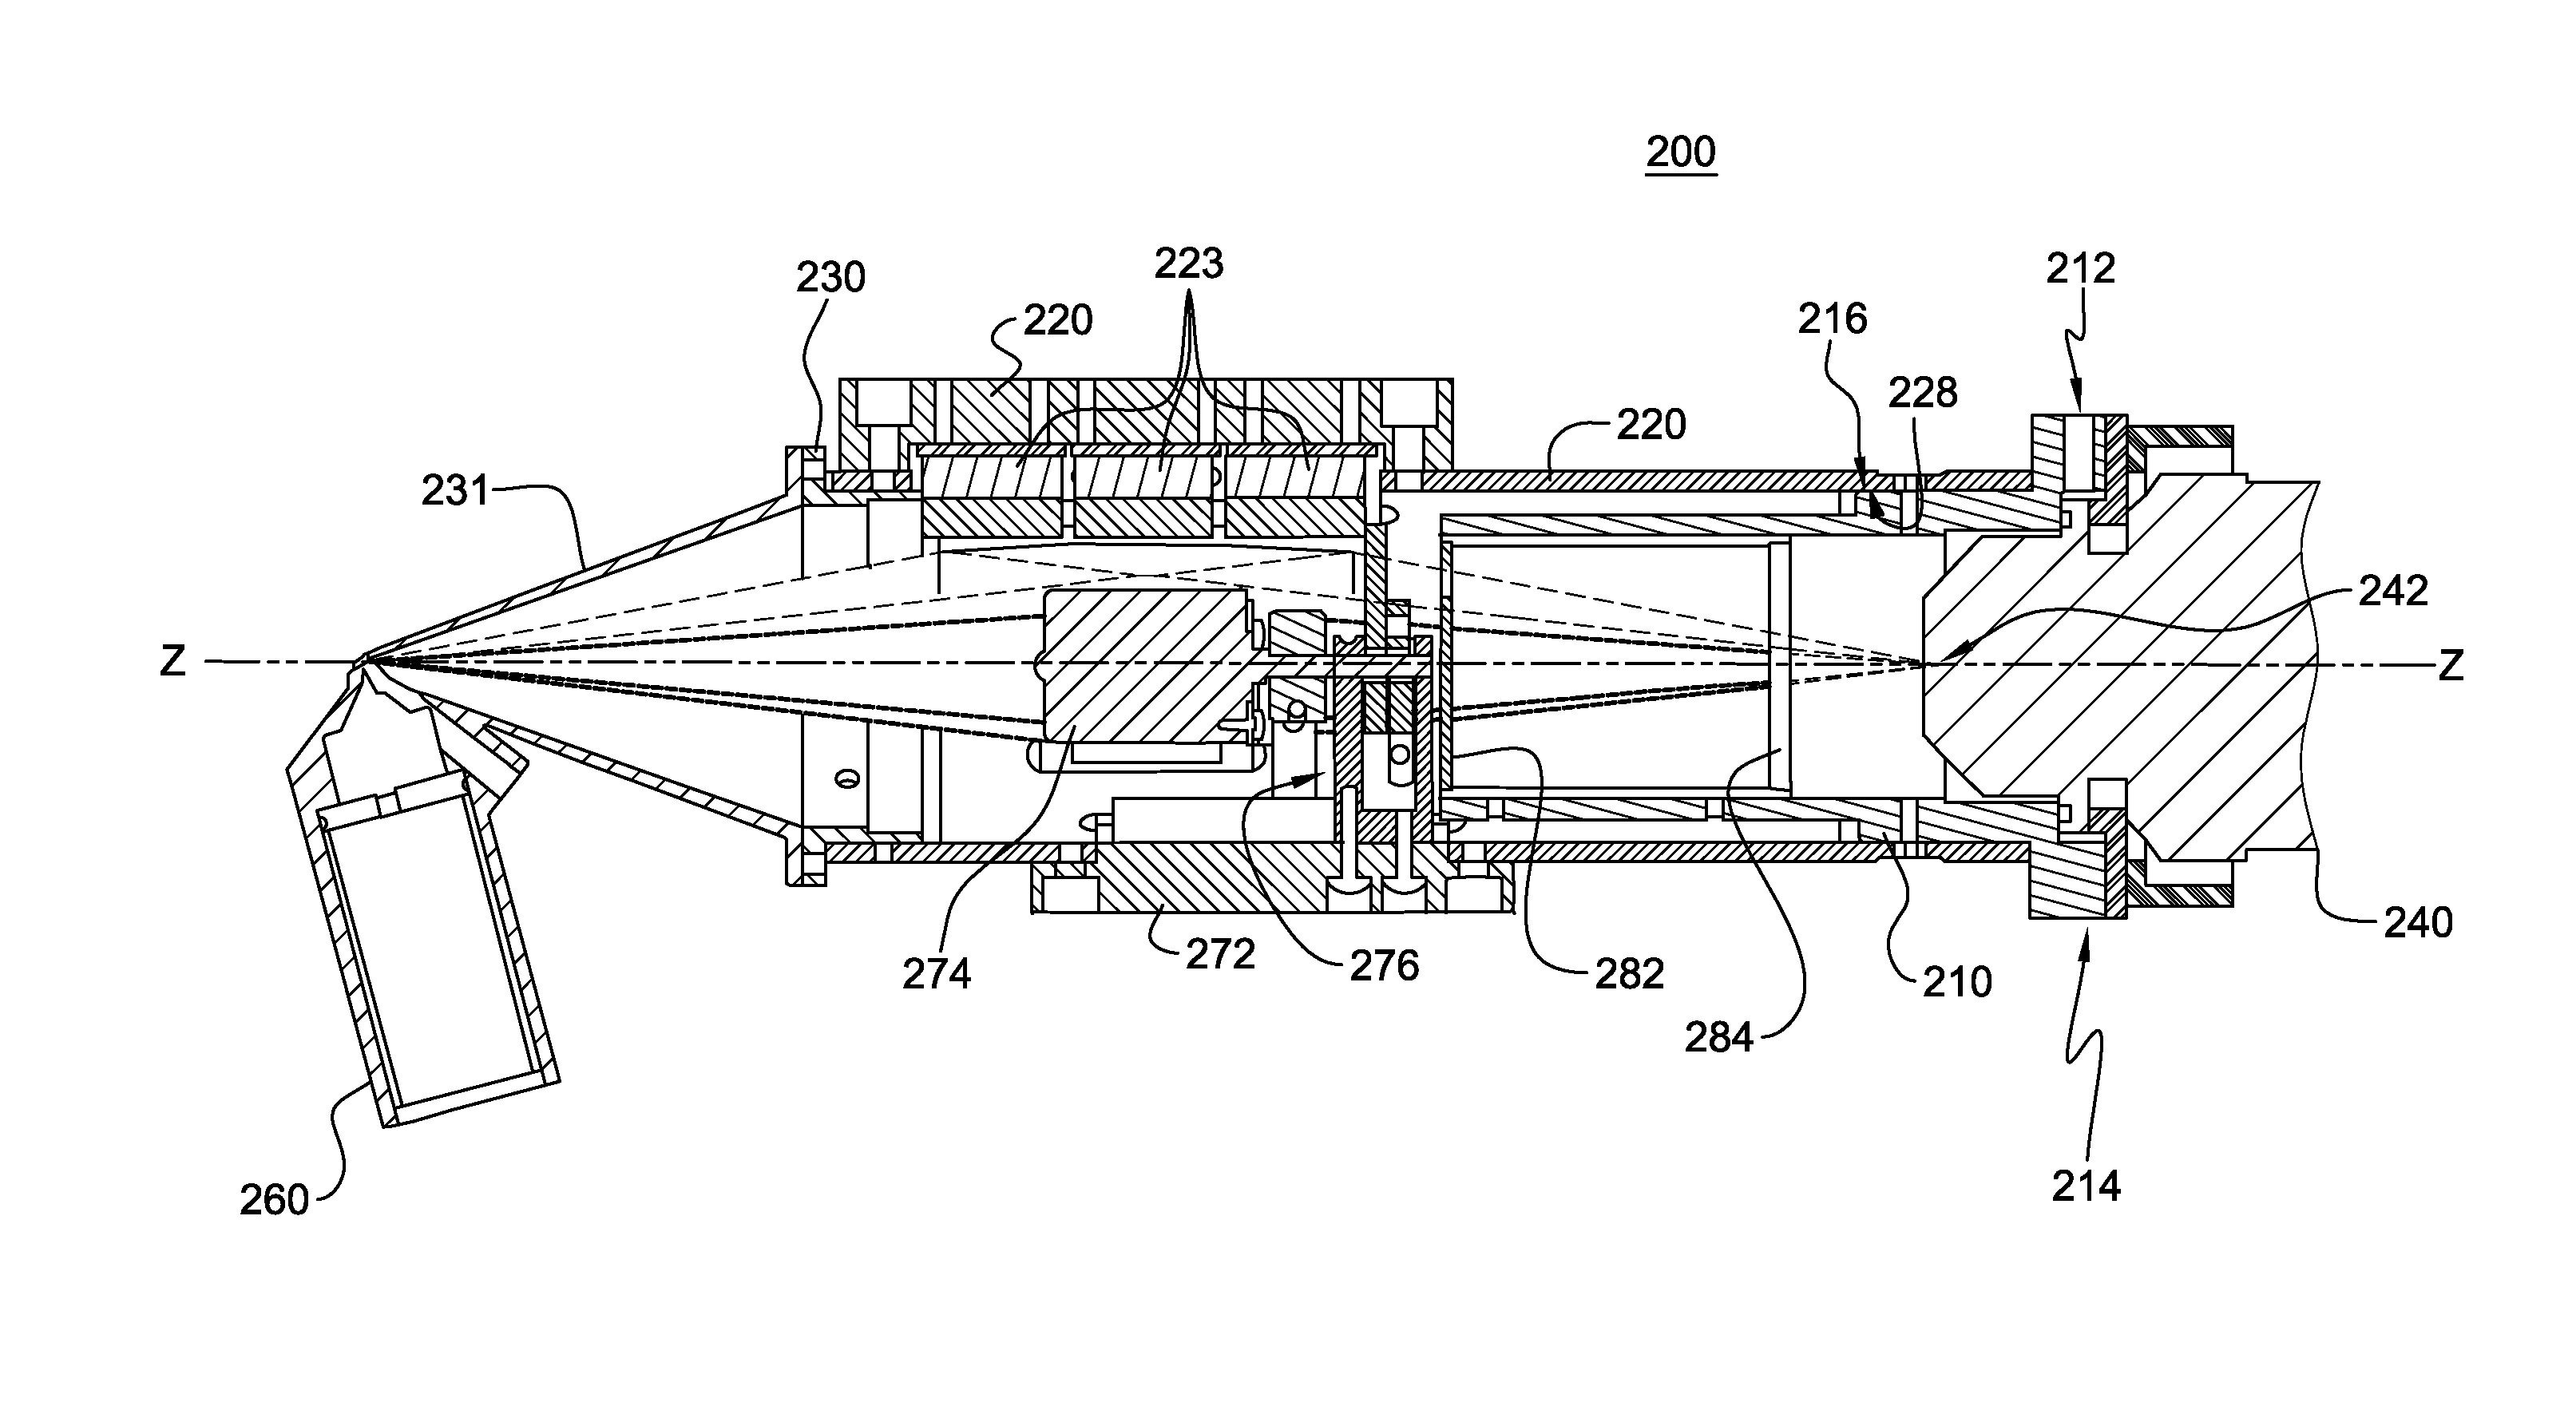 Xrf system having multiple excitation energy bands in highly aligned package